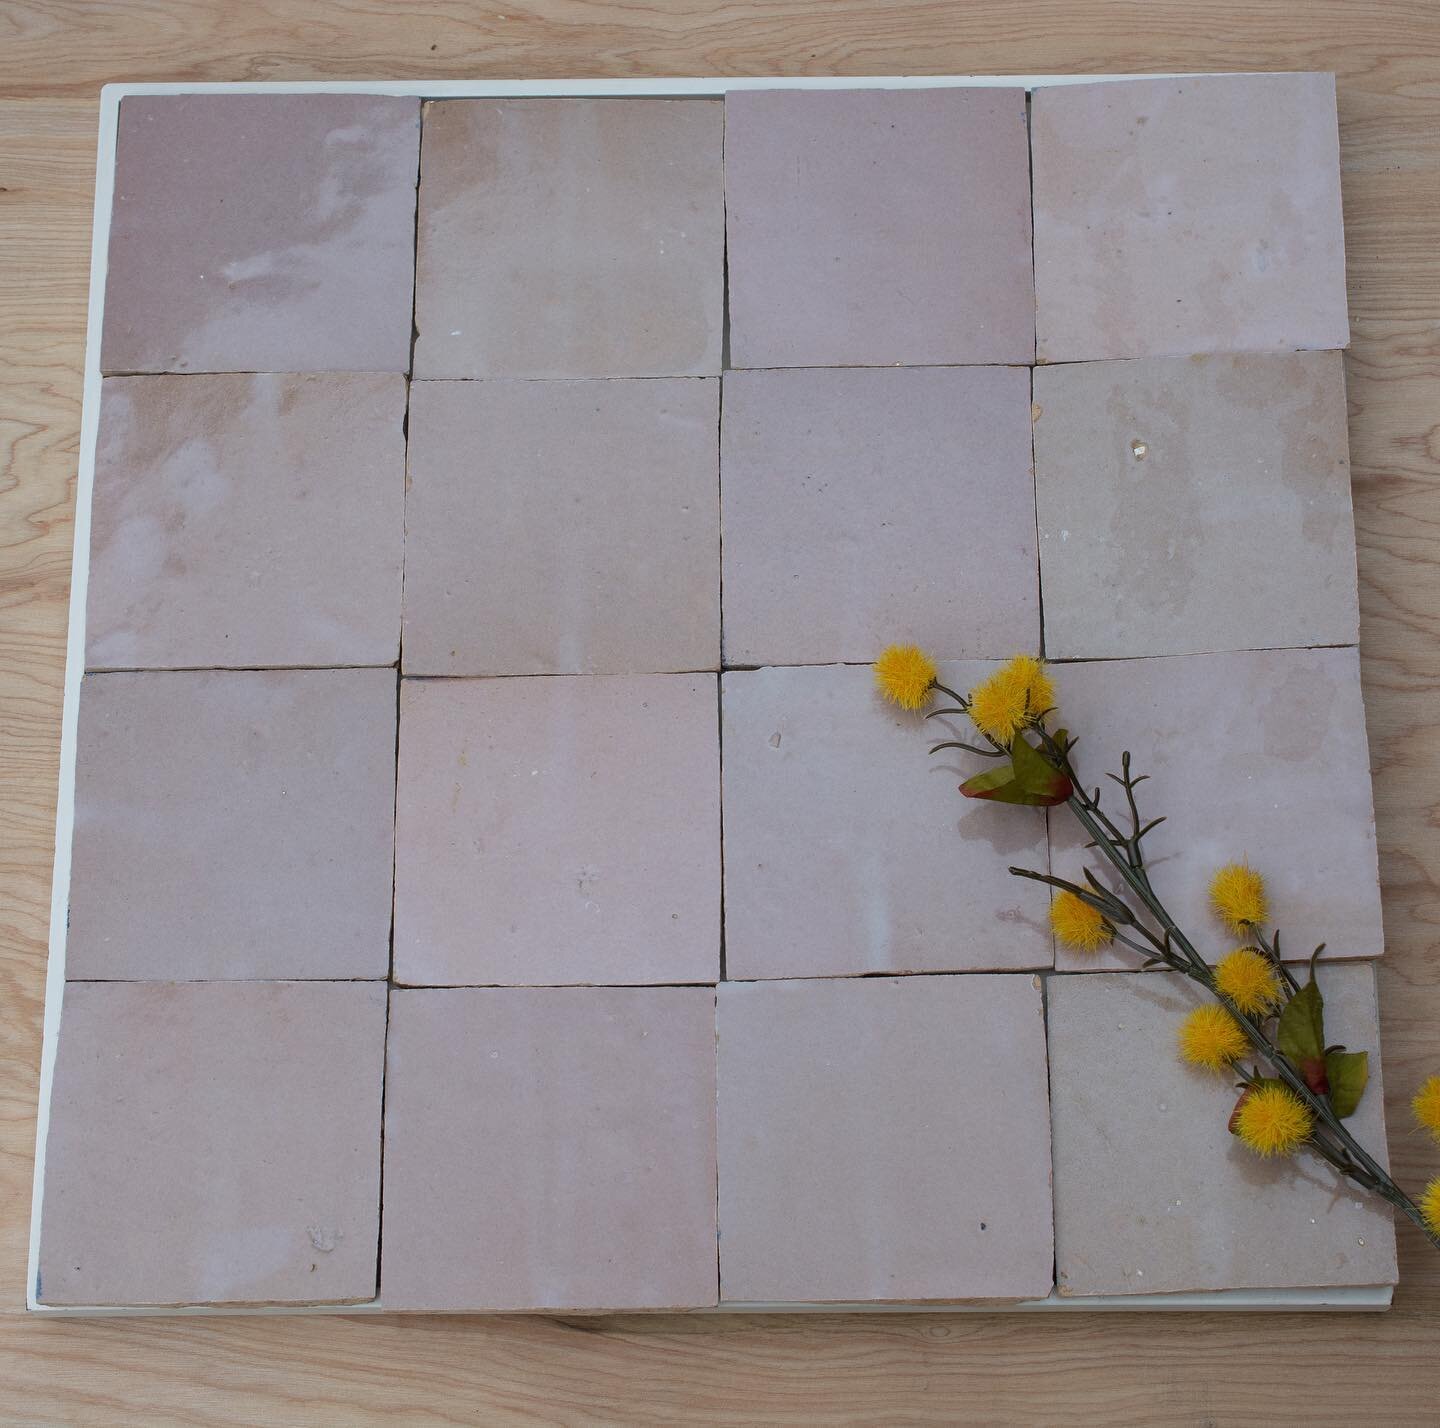 A tile so beautiful, it deserves it&rsquo;s own post. Thanks to @riadtile for gifting me these zellige tiles for my kitchen project. In a world of manufactured perfection, I love how irregular and imperfect these are. Each tile is made with actual ha